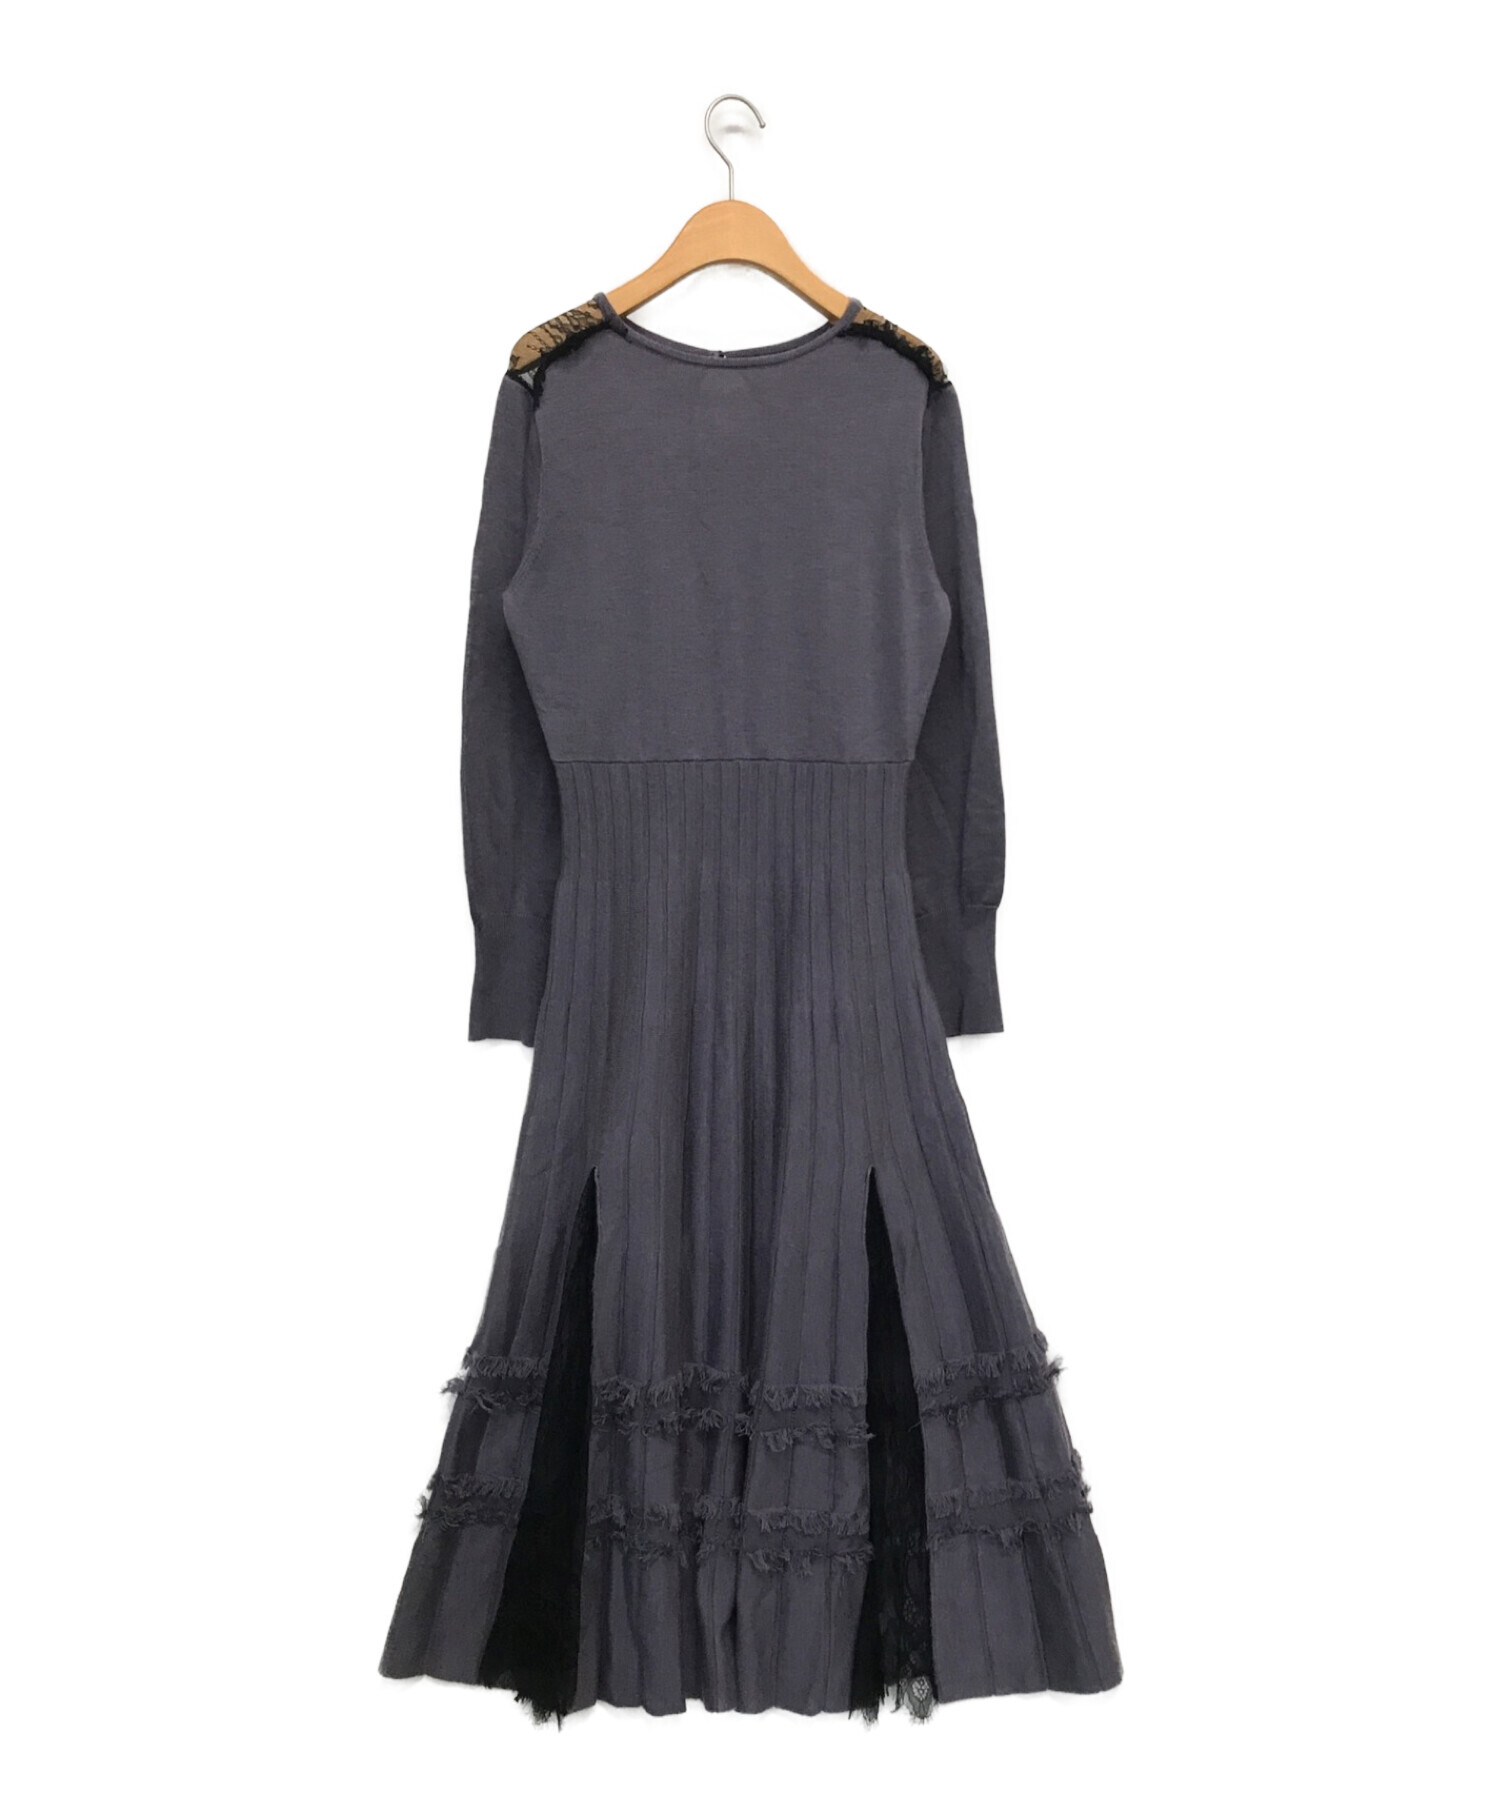 Lace Trimmed Knit Long Dress her lip toロングワンピース/マキシワンピース